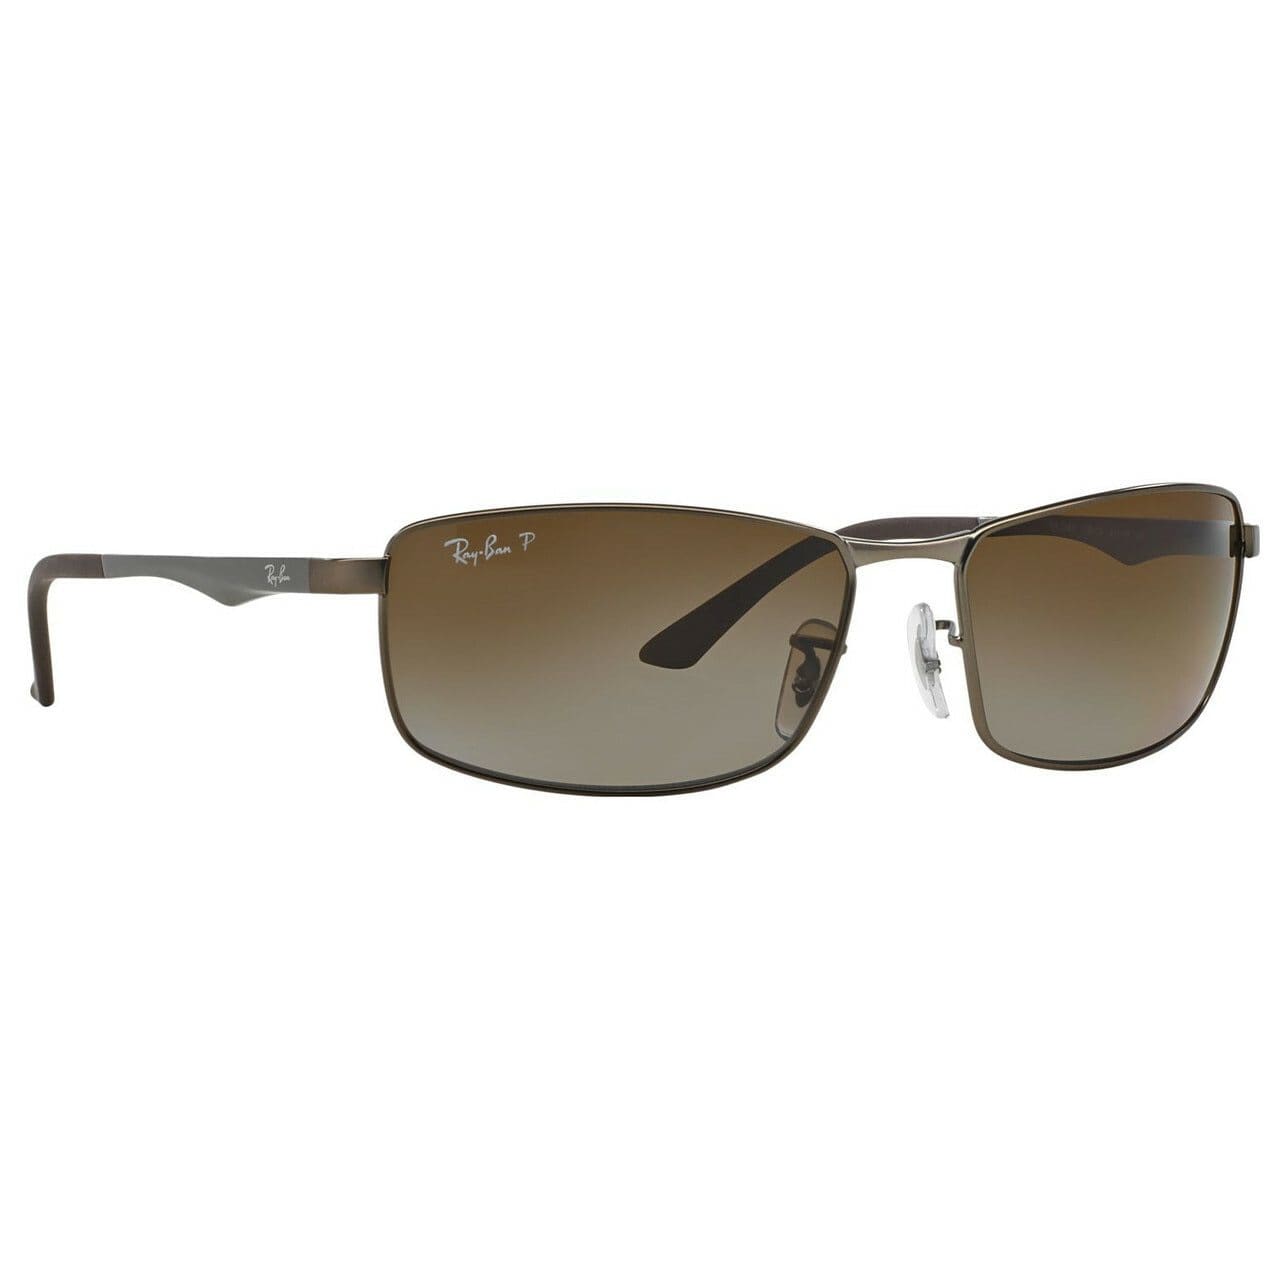 Ray-Ban RB3498 029/T5 Active Lifestyle Sunglasses Gunmetal Frame 61mm Polarized Brown Gradient Lens 8053672303681